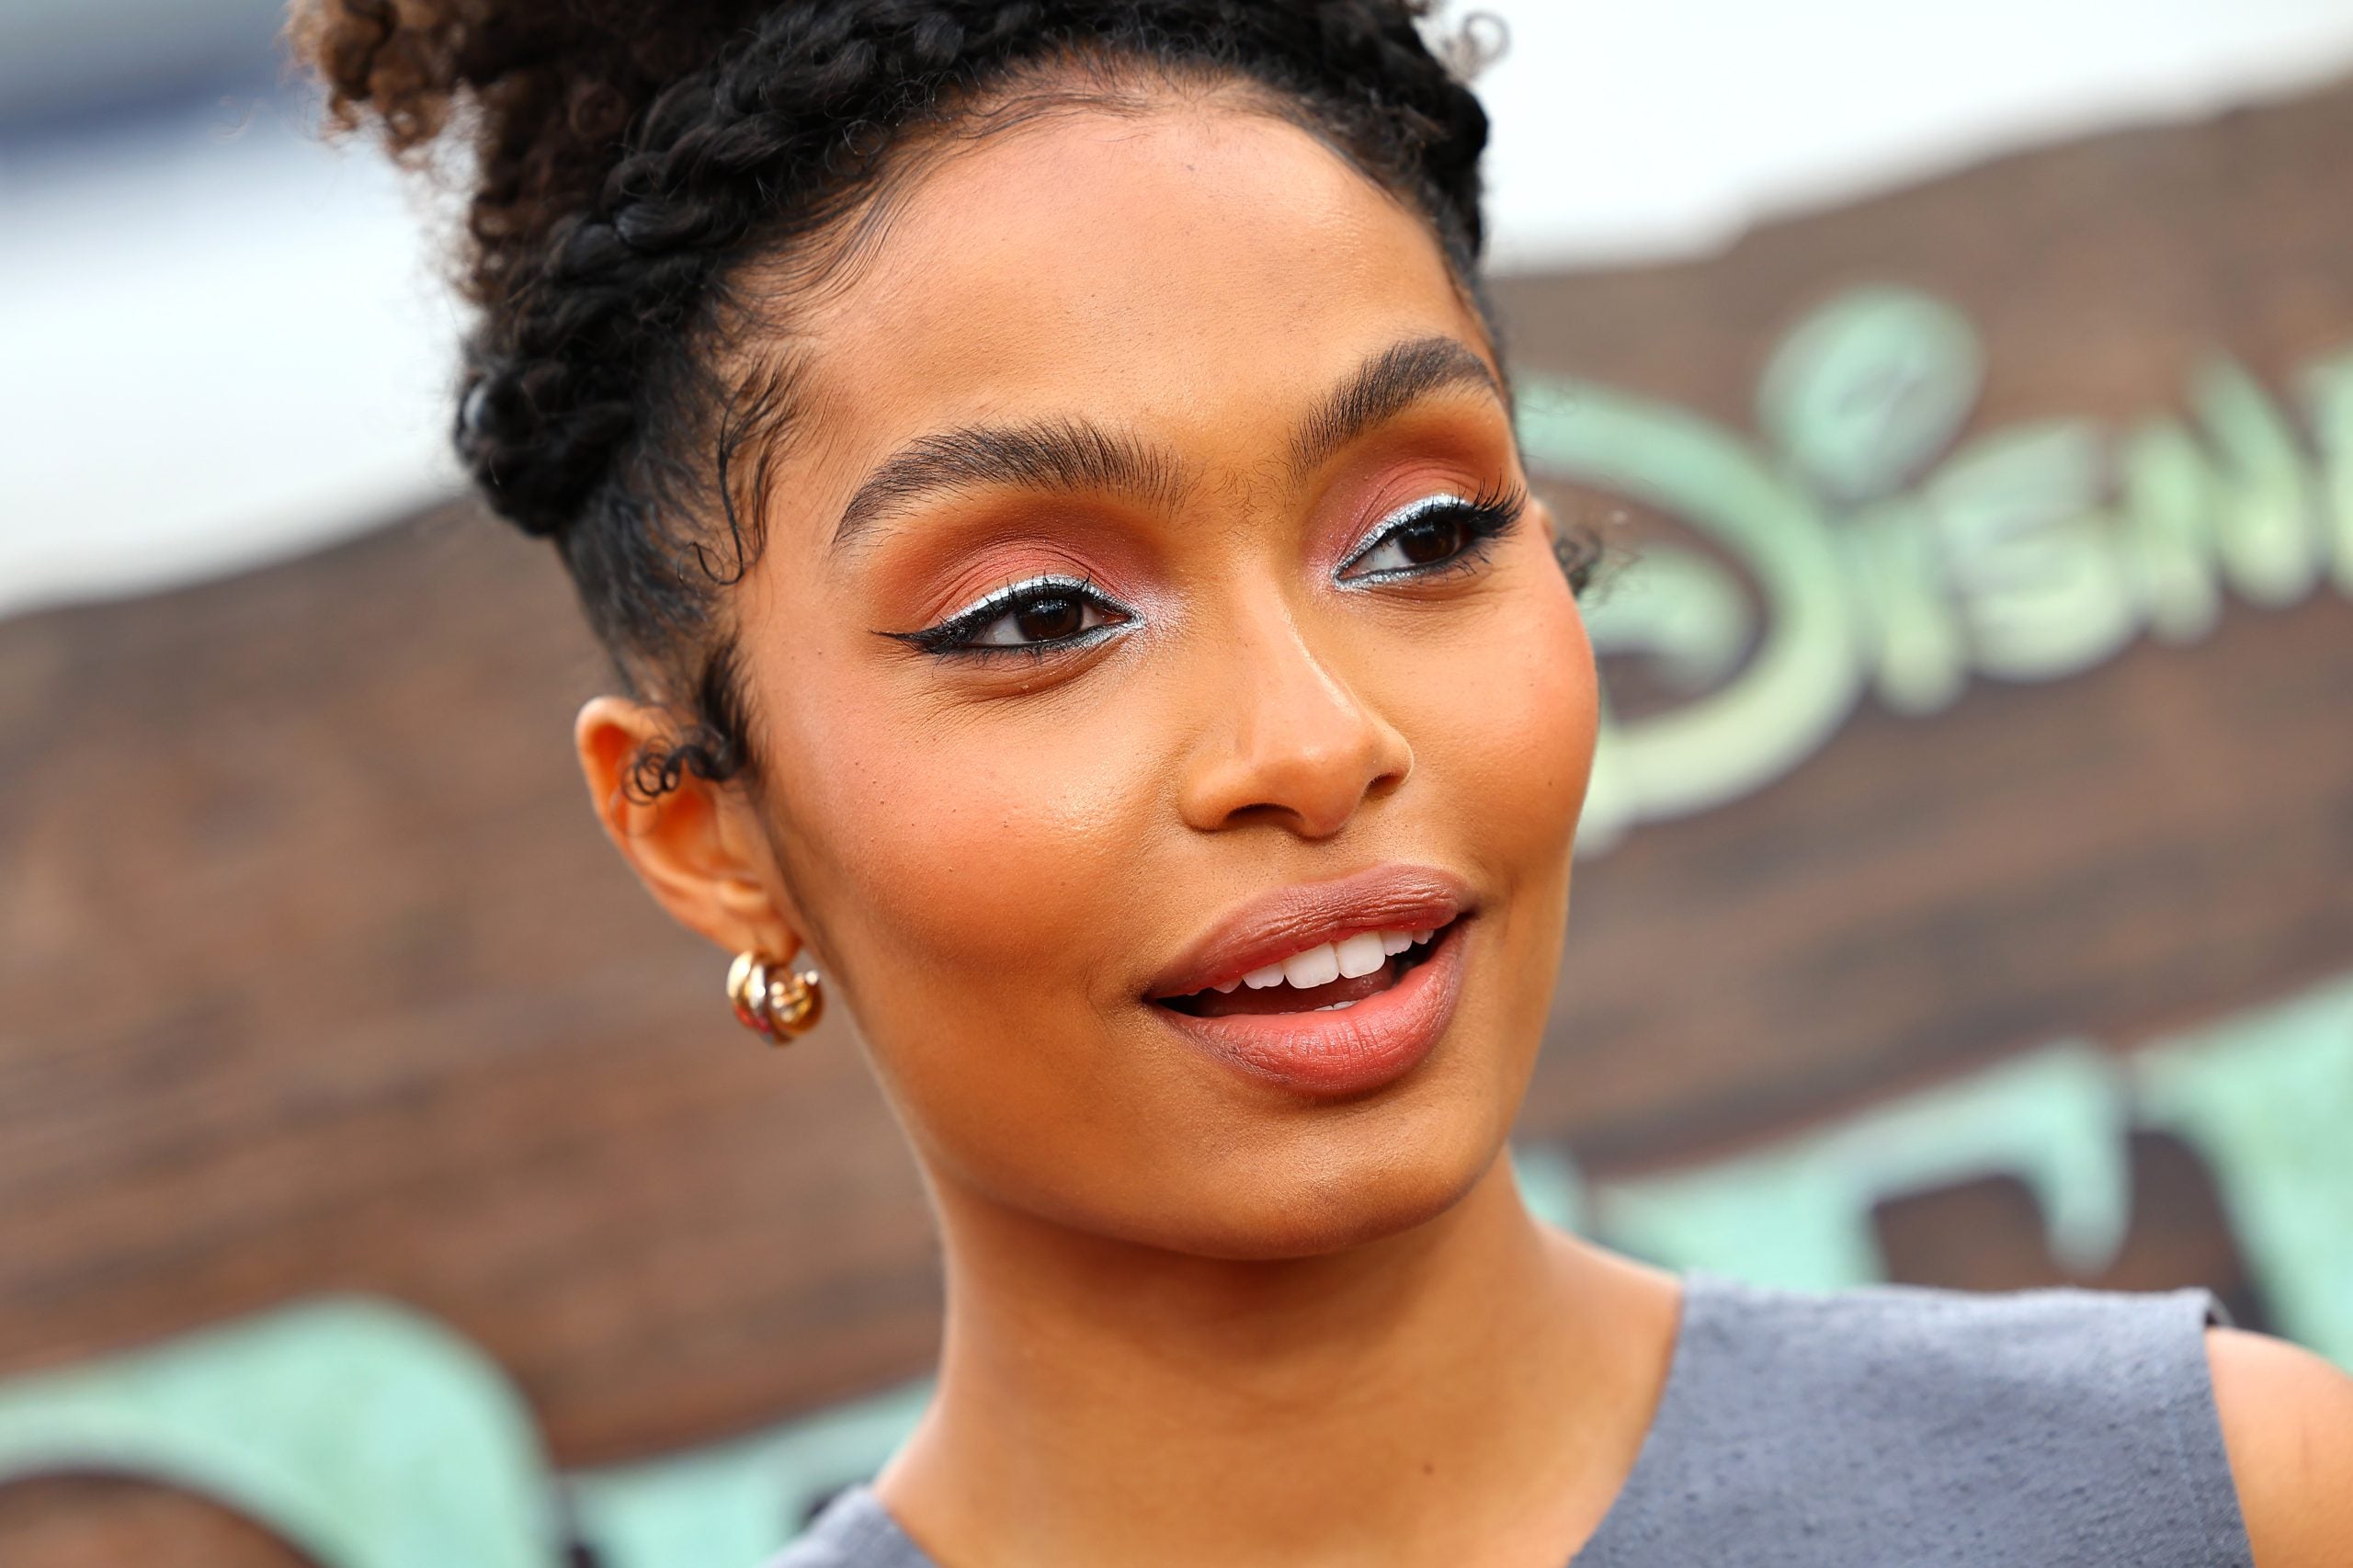 Harvard Grad Yara Shahidi Says ‘College Provided A Safe Space To Do A Lot Of Growing Up’